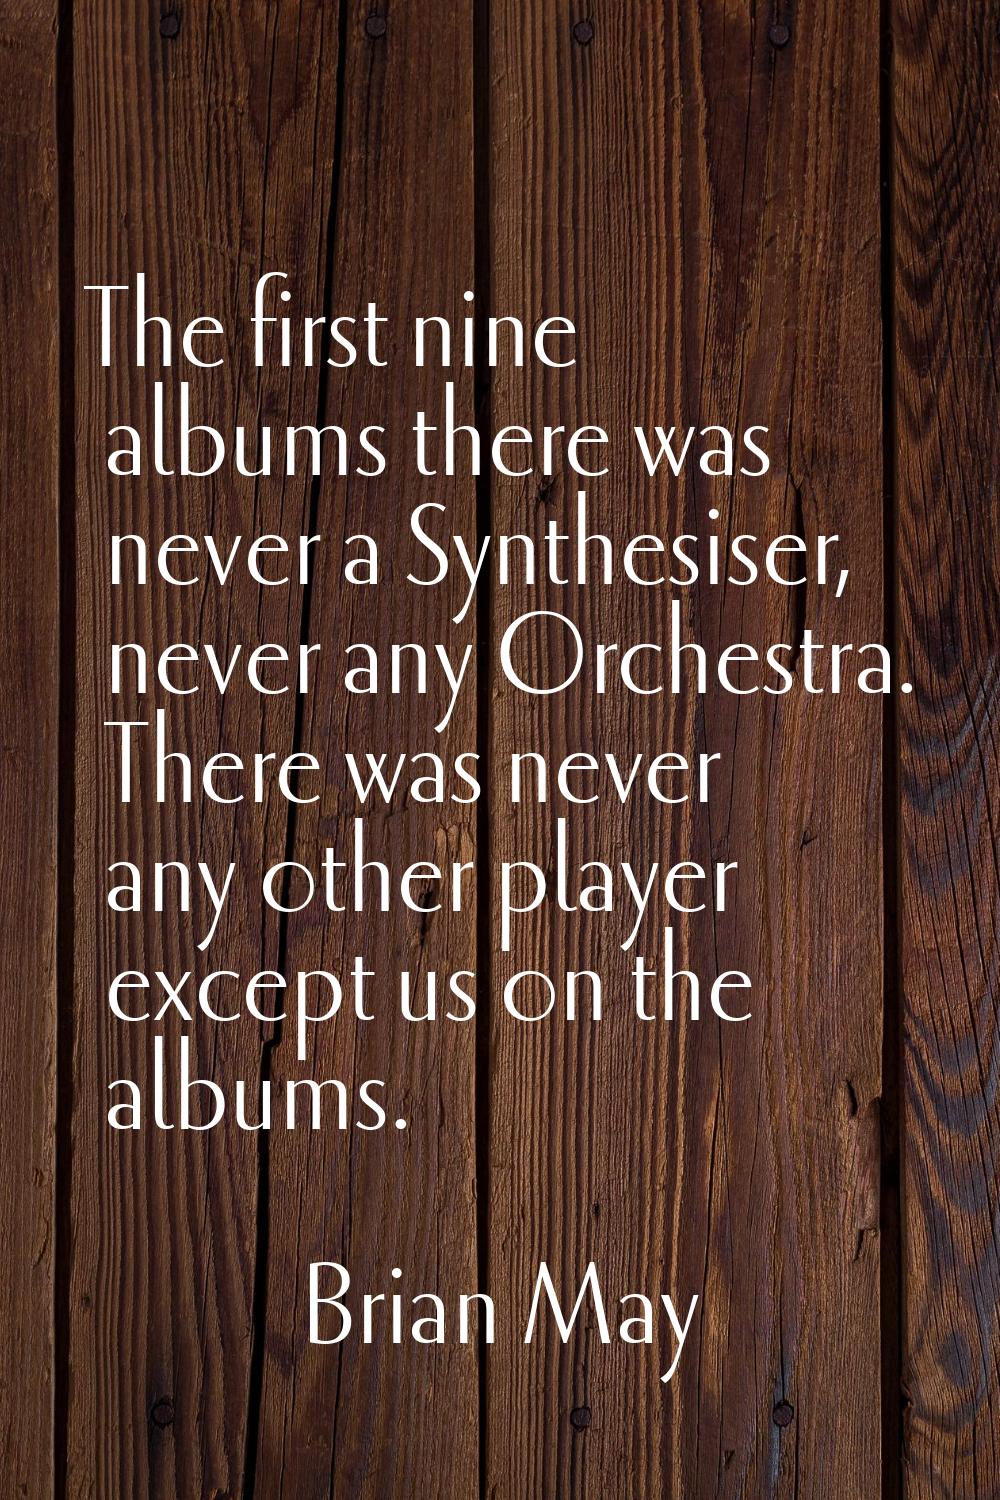 The first nine albums there was never a Synthesiser, never any Orchestra. There was never any other